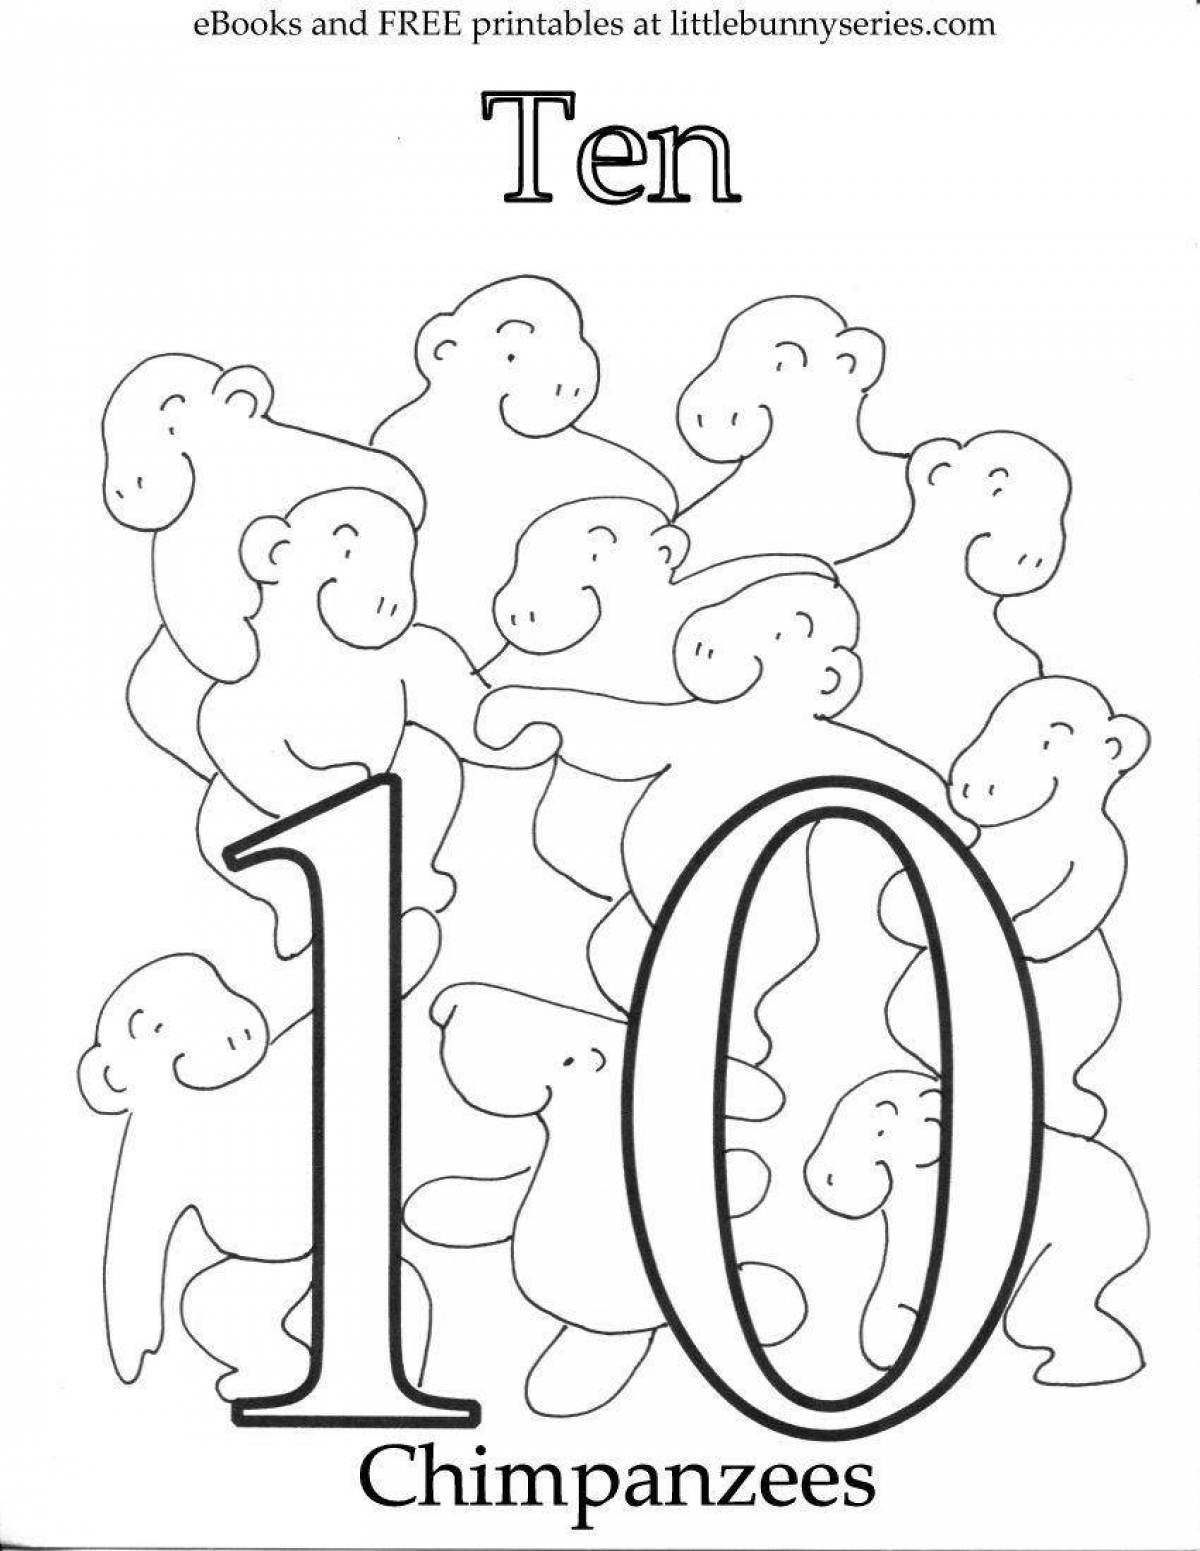 Fun coloring pages with page numbers